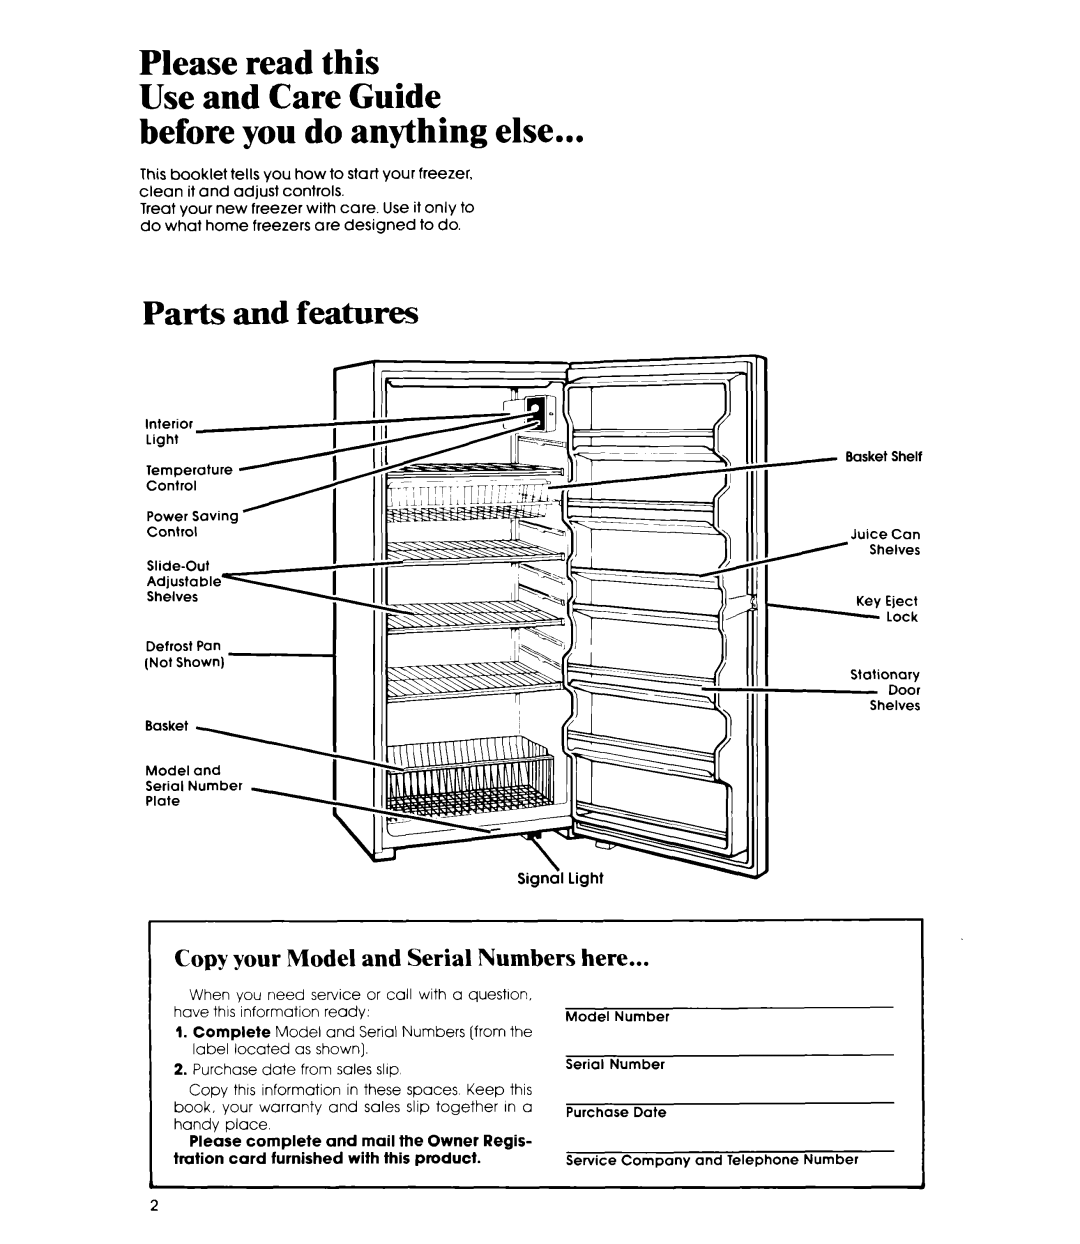 Whirlpool EV190N manual before you do anything else, Parts and features, Please read this Use and Care Guide 